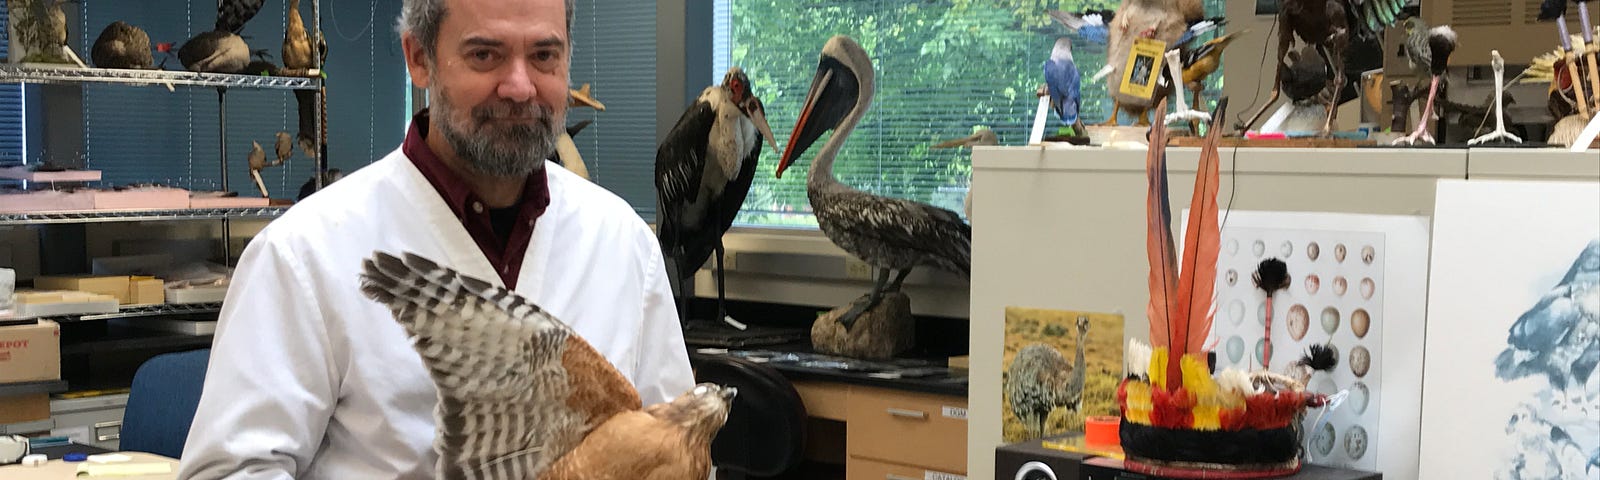 Dr. Pepper Trail, Senior Forensic Scientist and Ornithologist holding a hawk in the lab, full of birds and feathers.